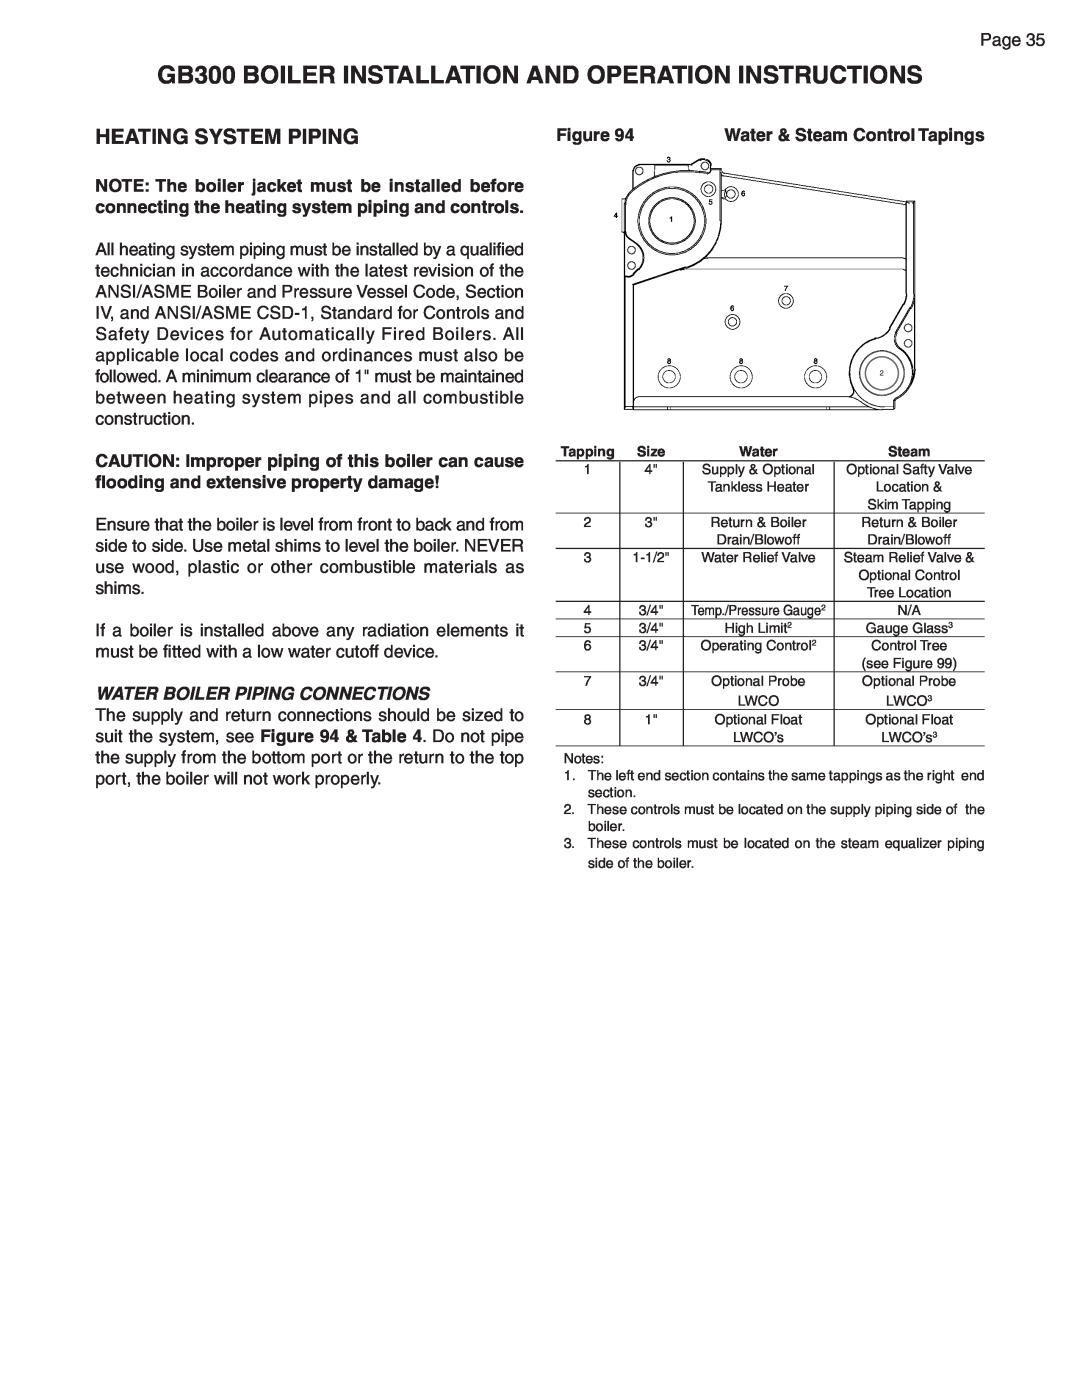 Smith Cast Iron Boilers GB300 warranty Heating System Piping, Figure, Water Boiler Piping Connections 